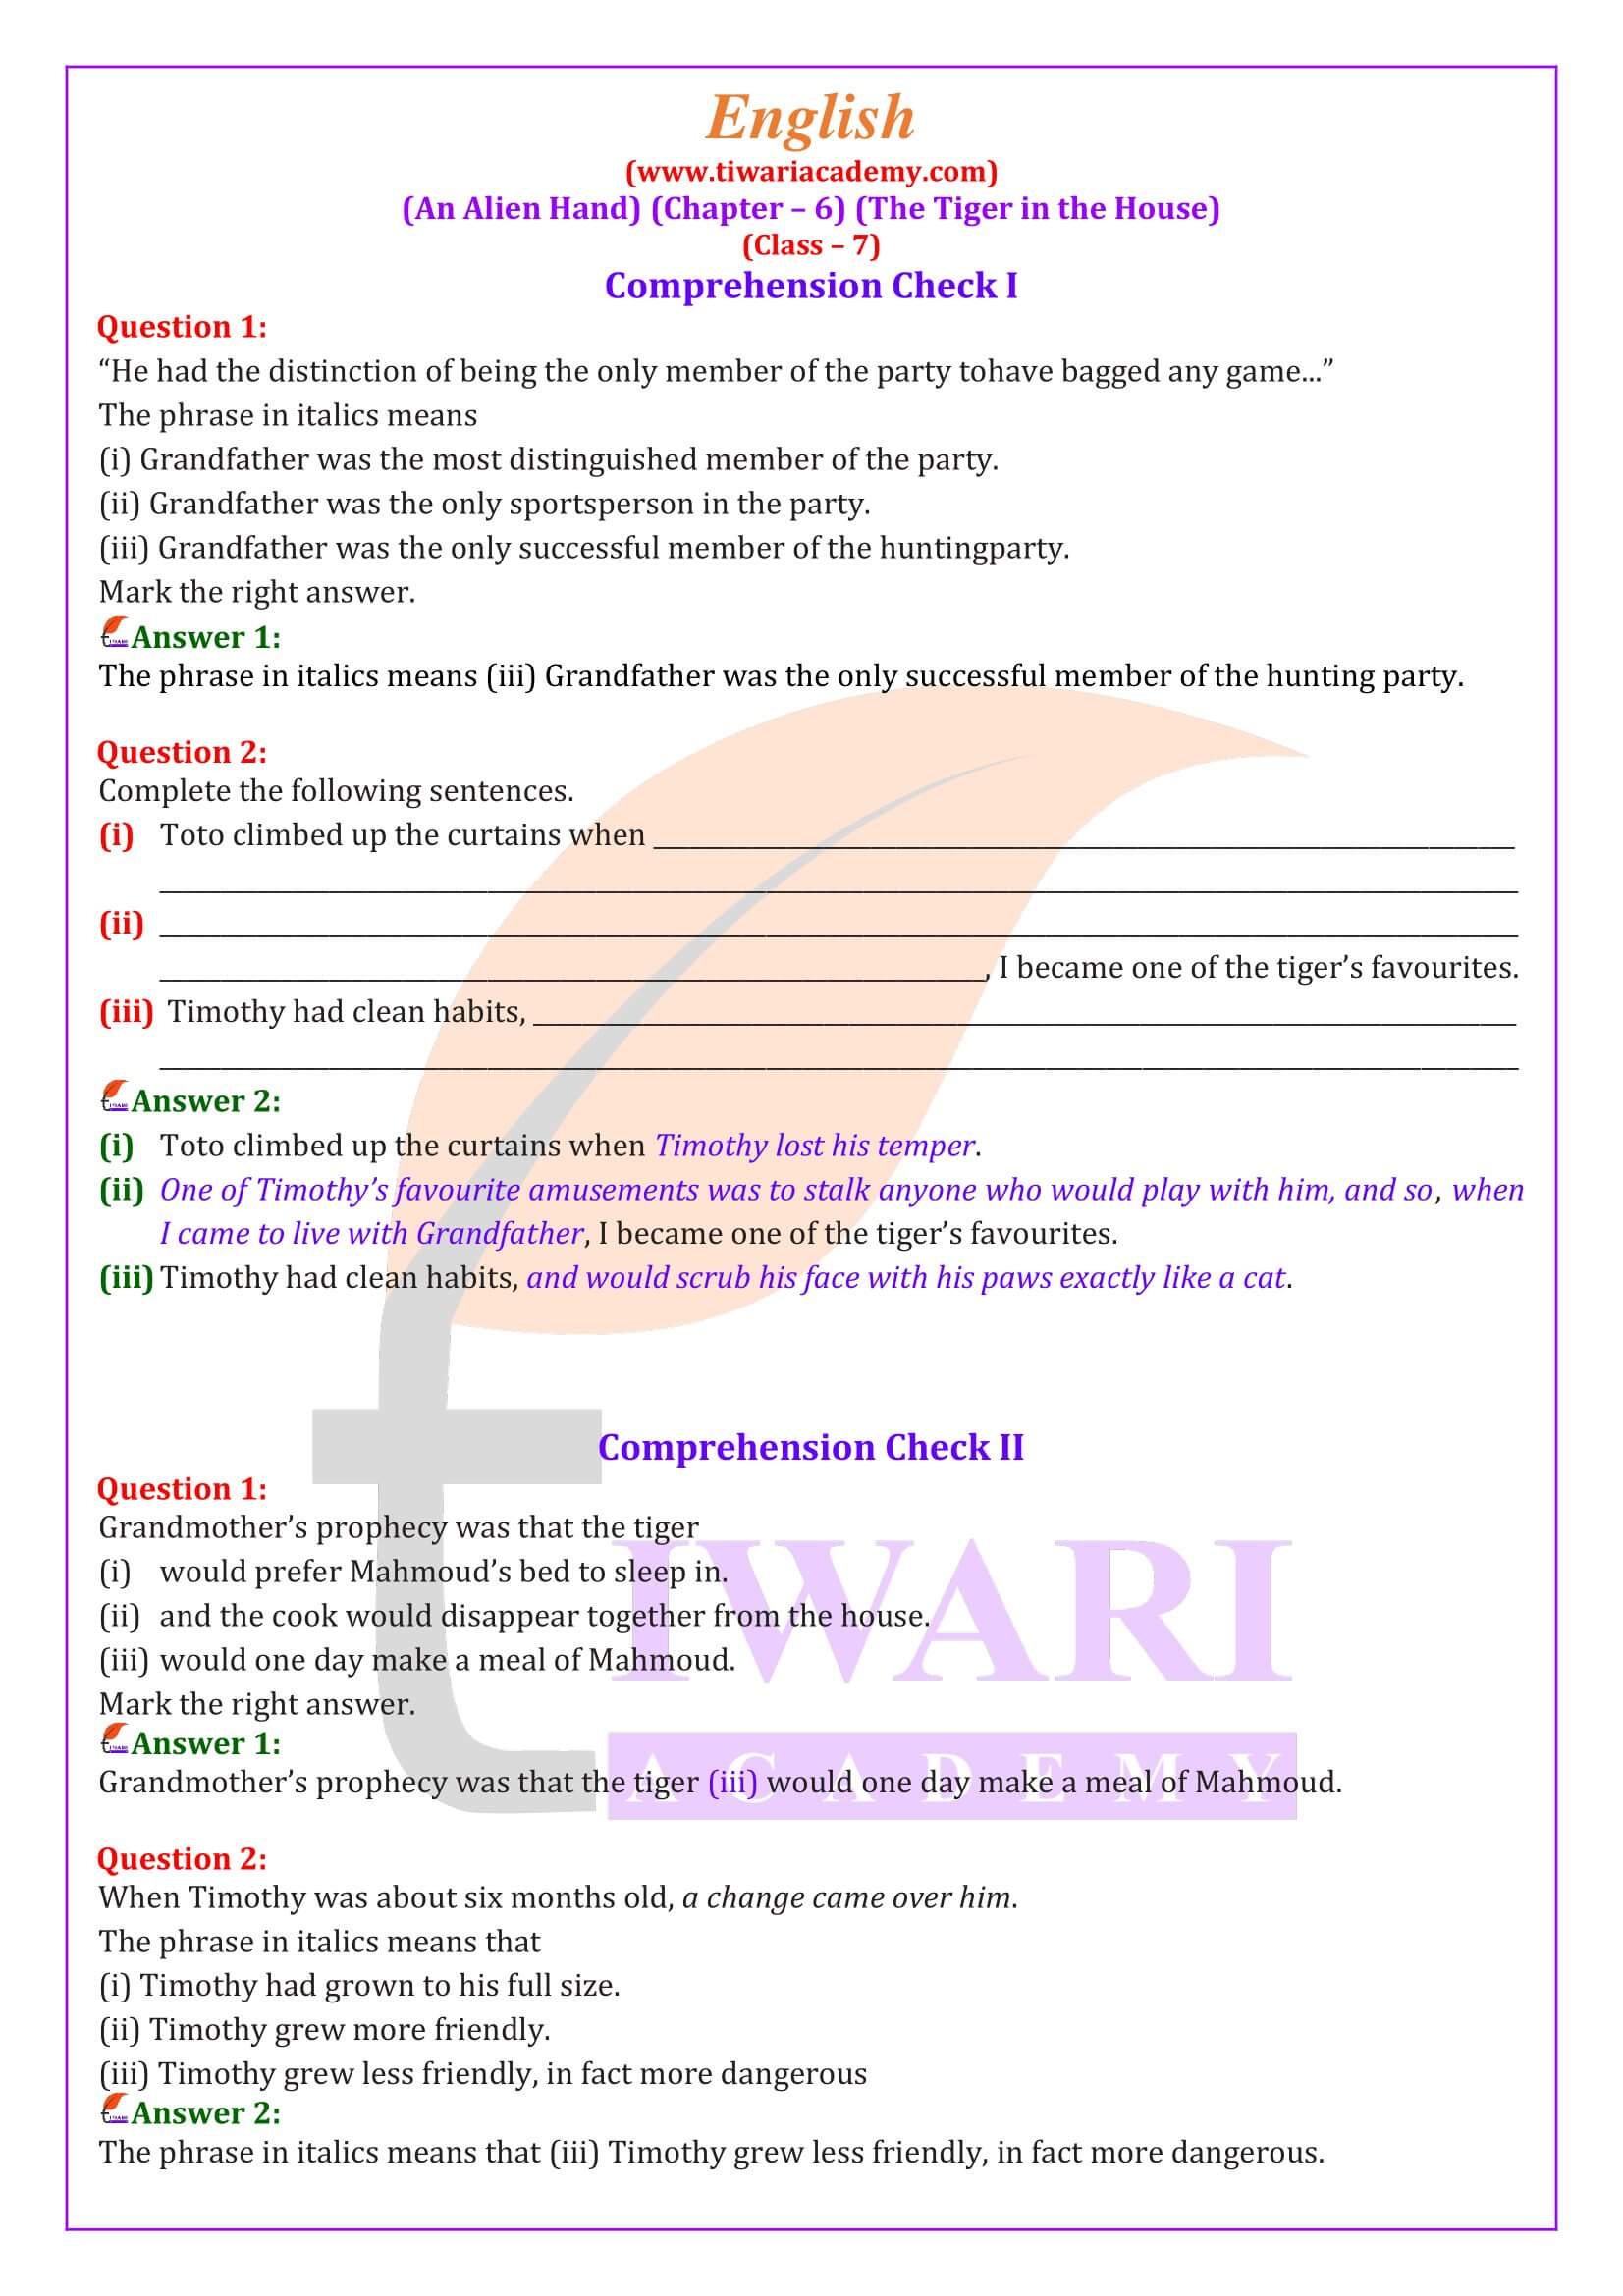 NCERT Solutions for Class 7 English an Alien Hand Chapter 6 a Tiger in the House